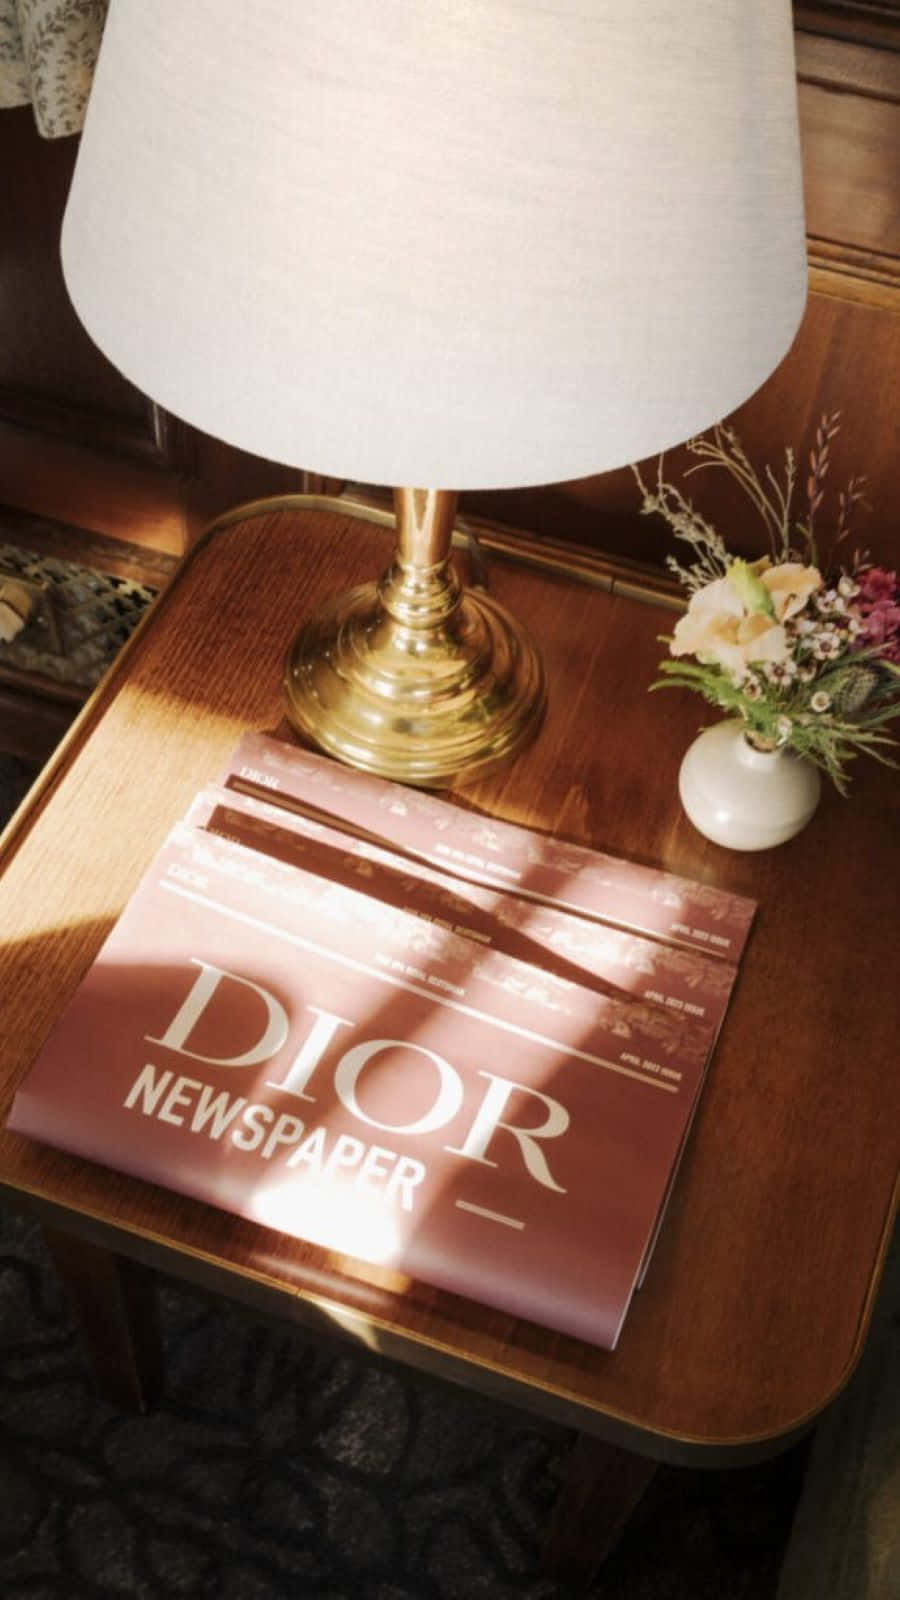 Dior Newspaperon Wooden Table Wallpaper